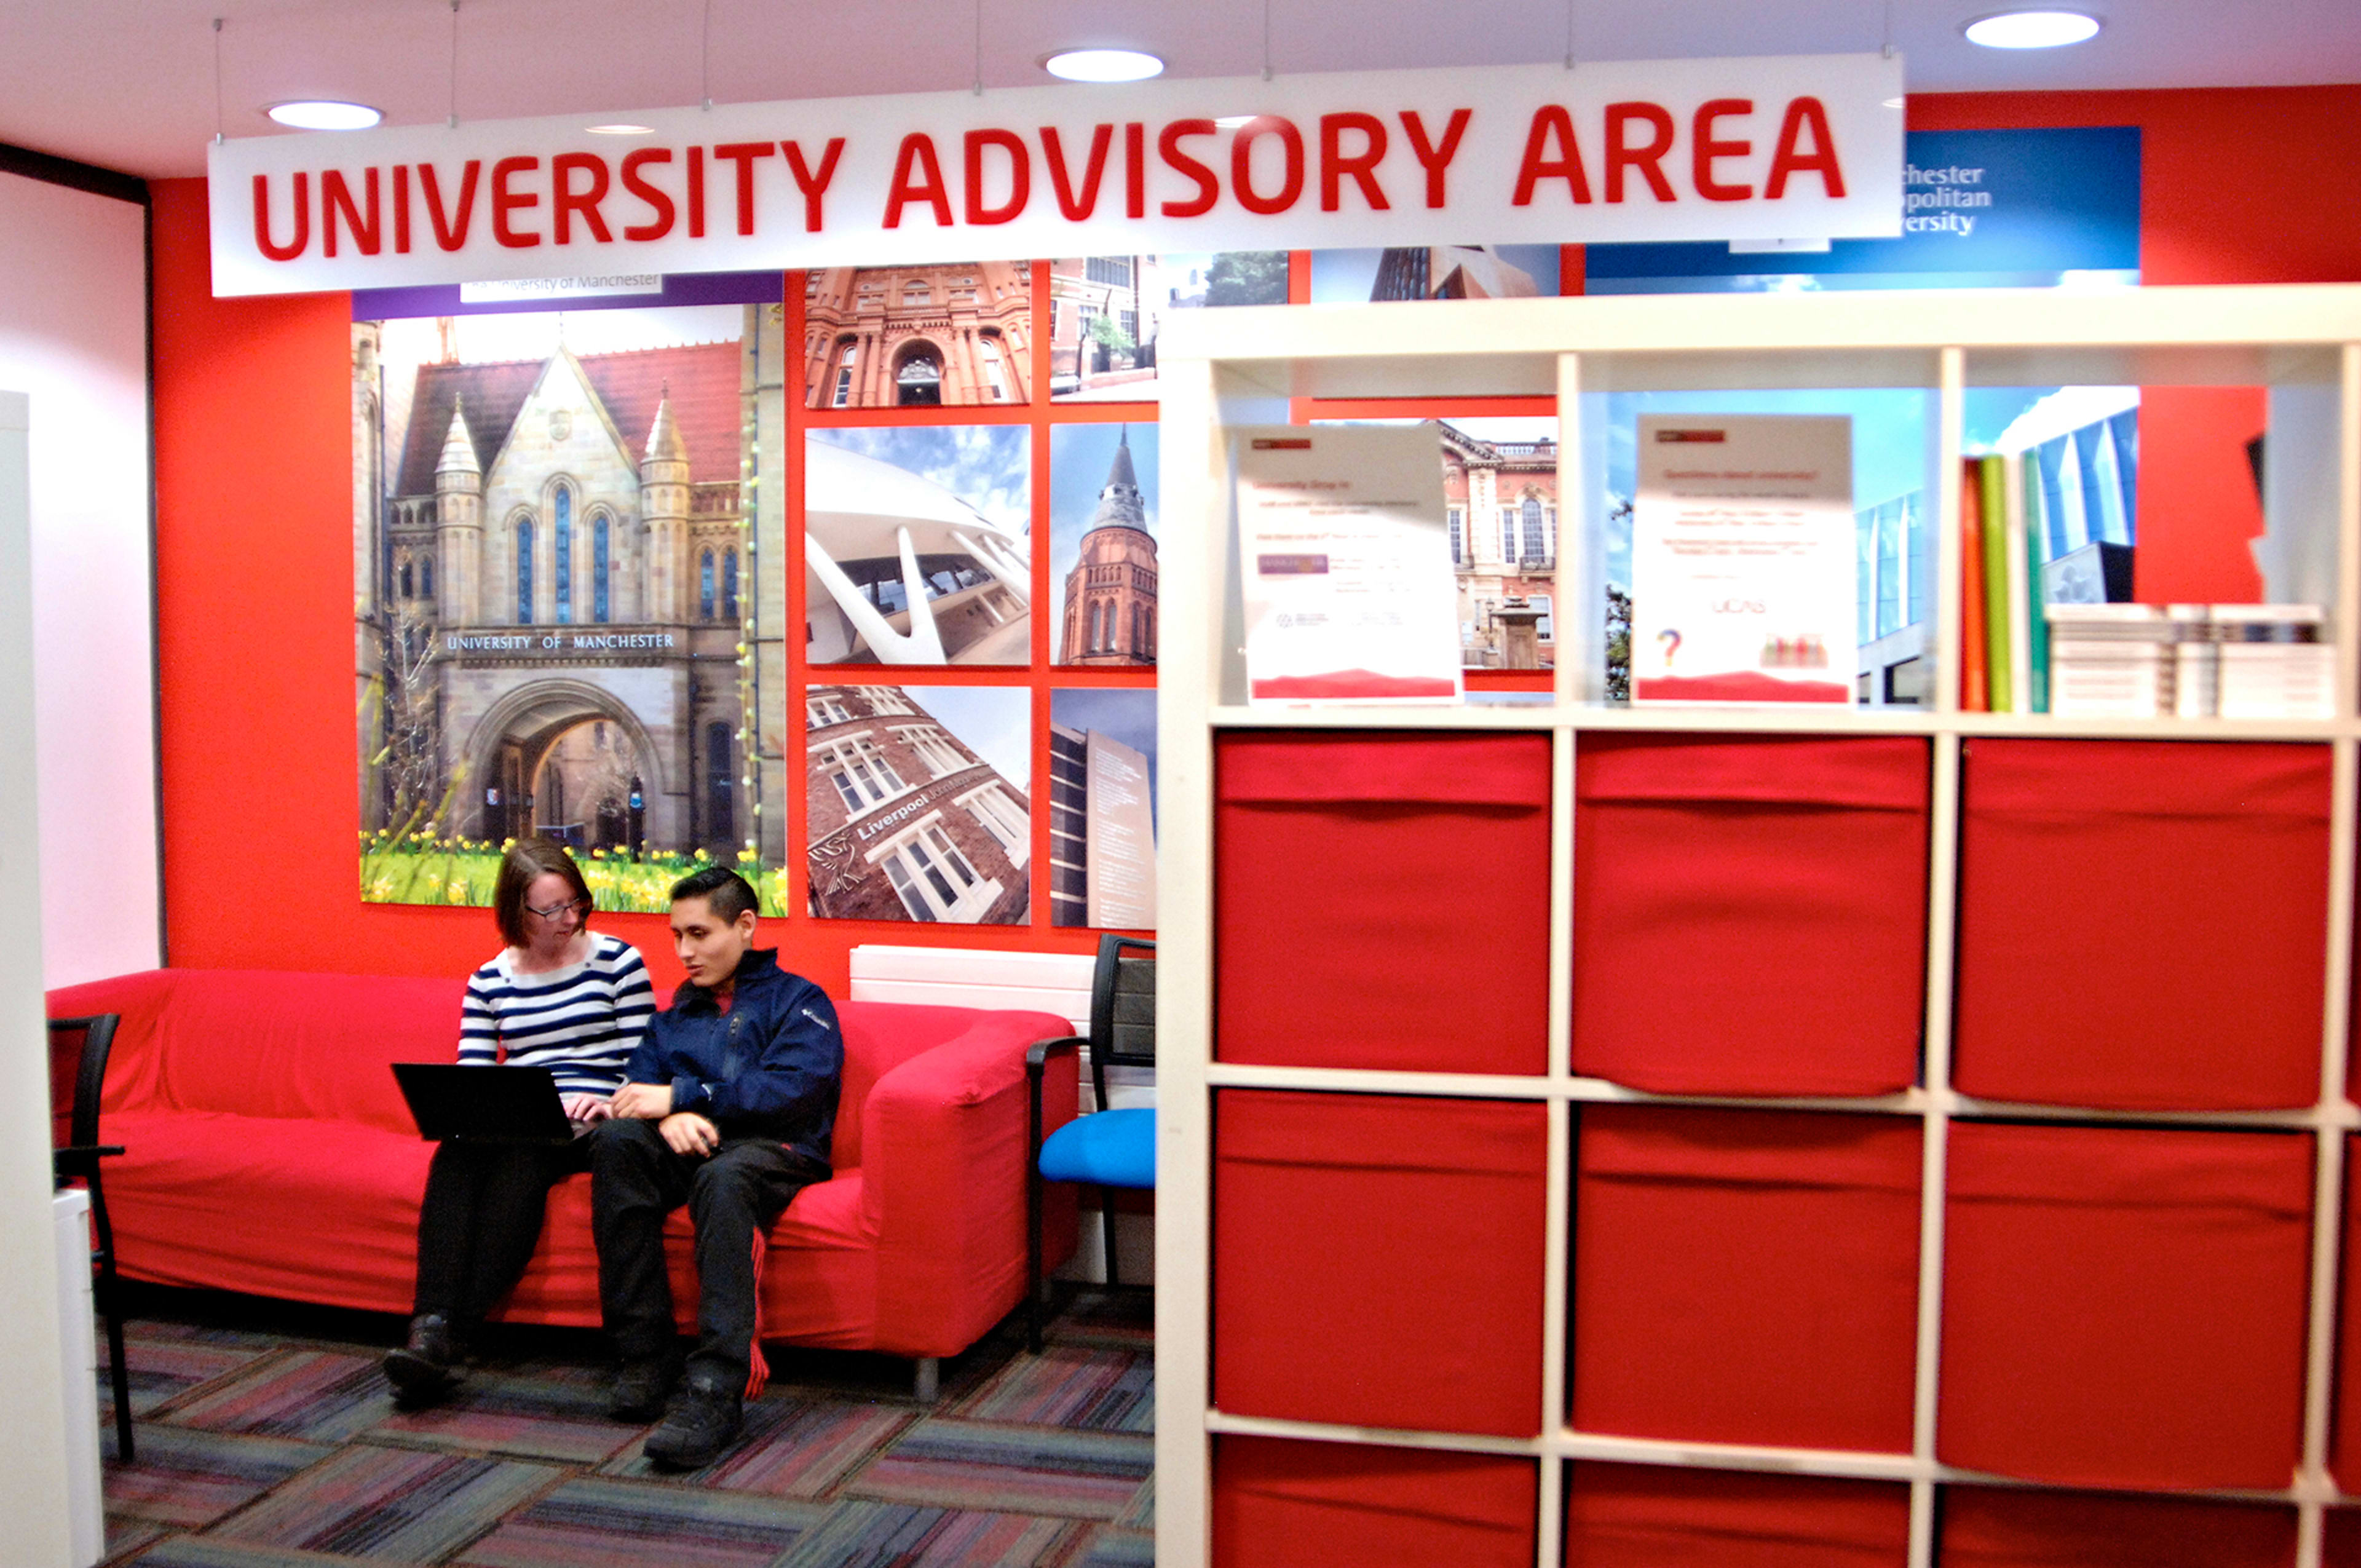 University advisory area in centre with staff helping international student